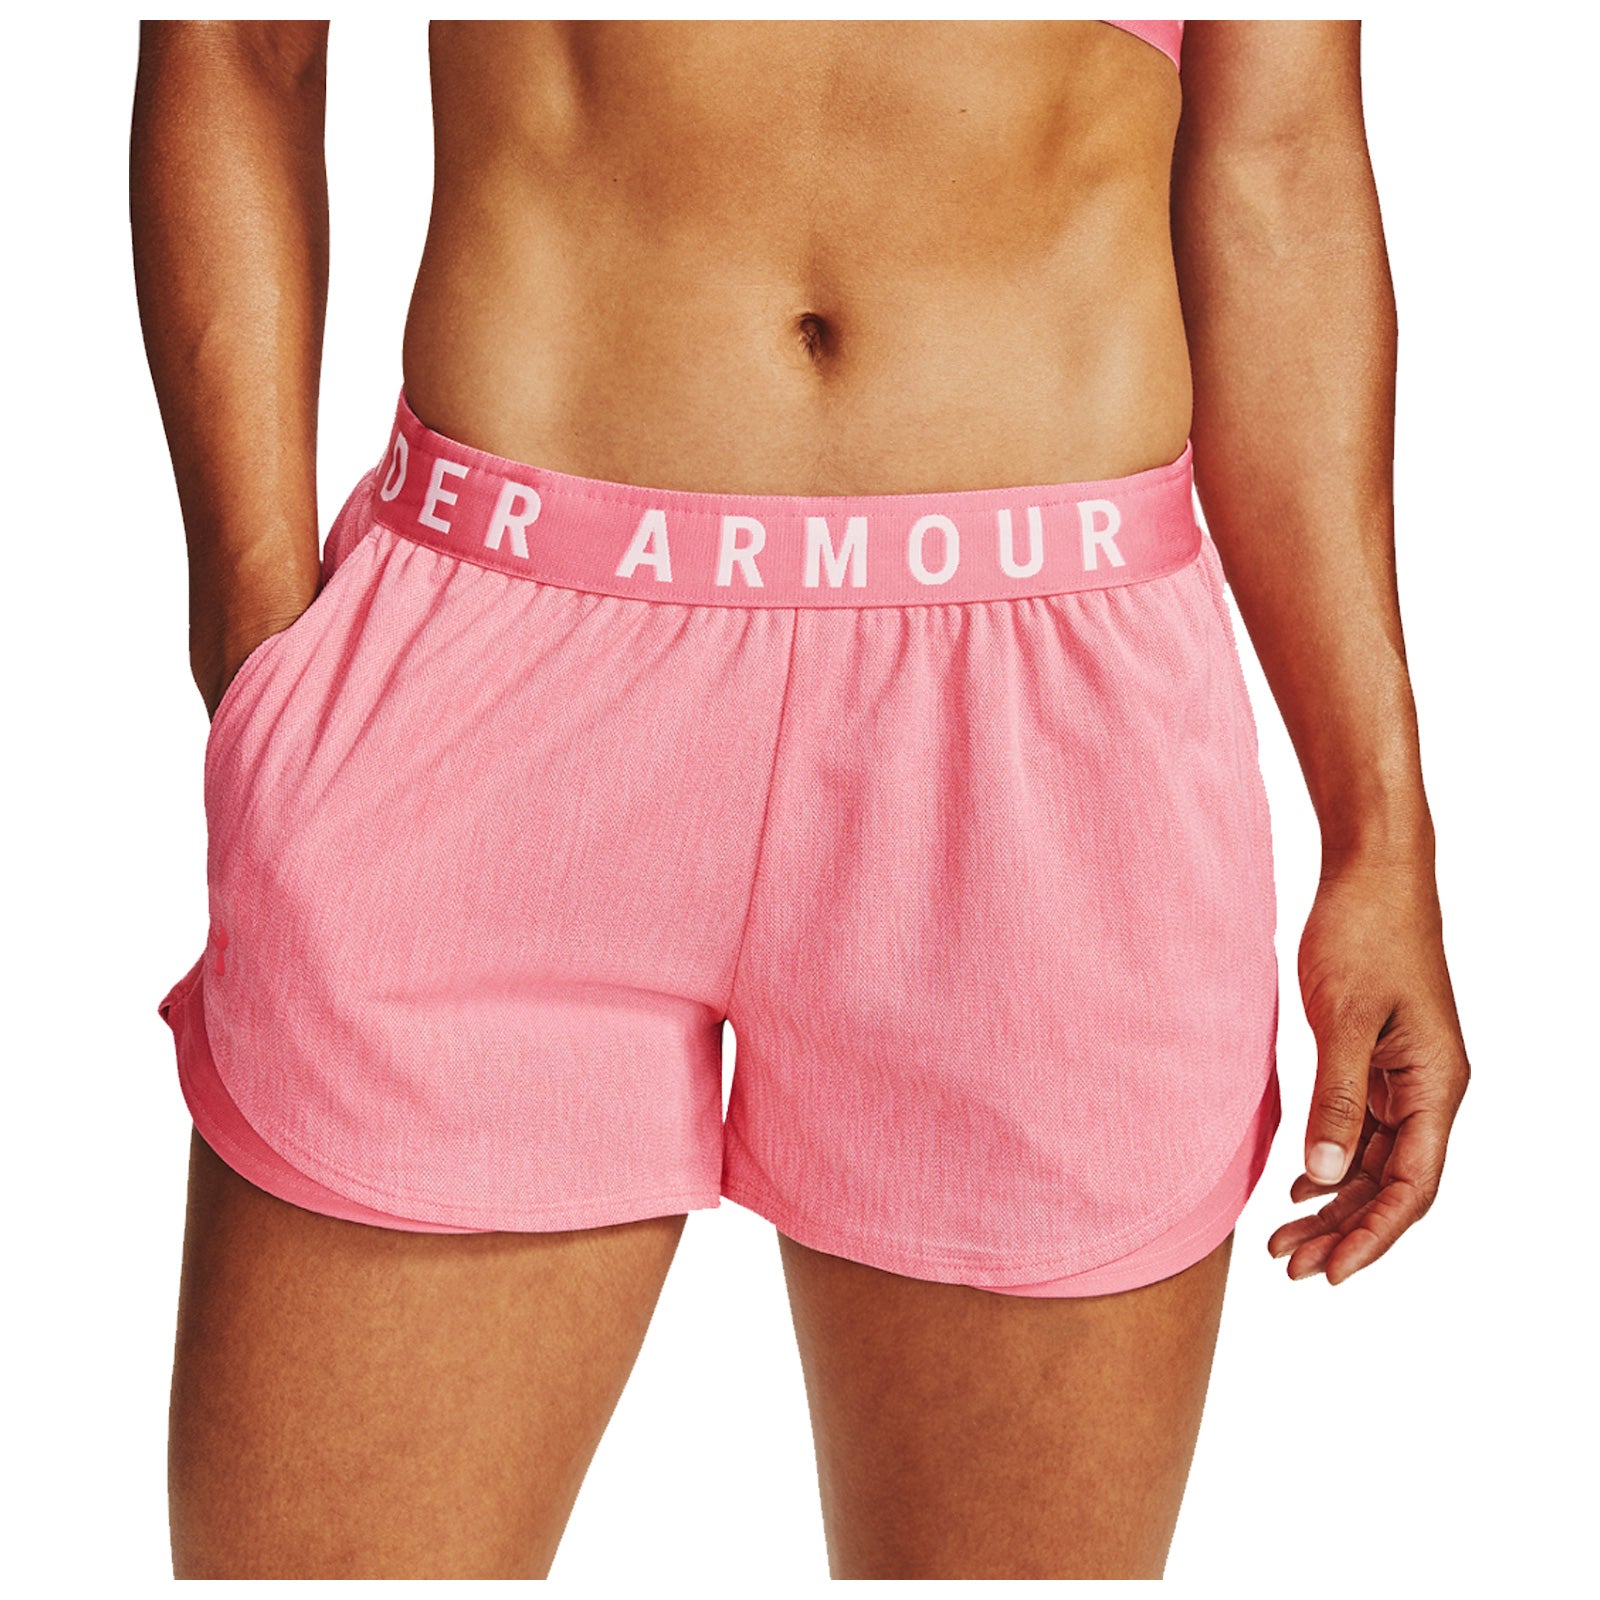 Under Armour Ladies Play Up 3.0 Twist Shorts